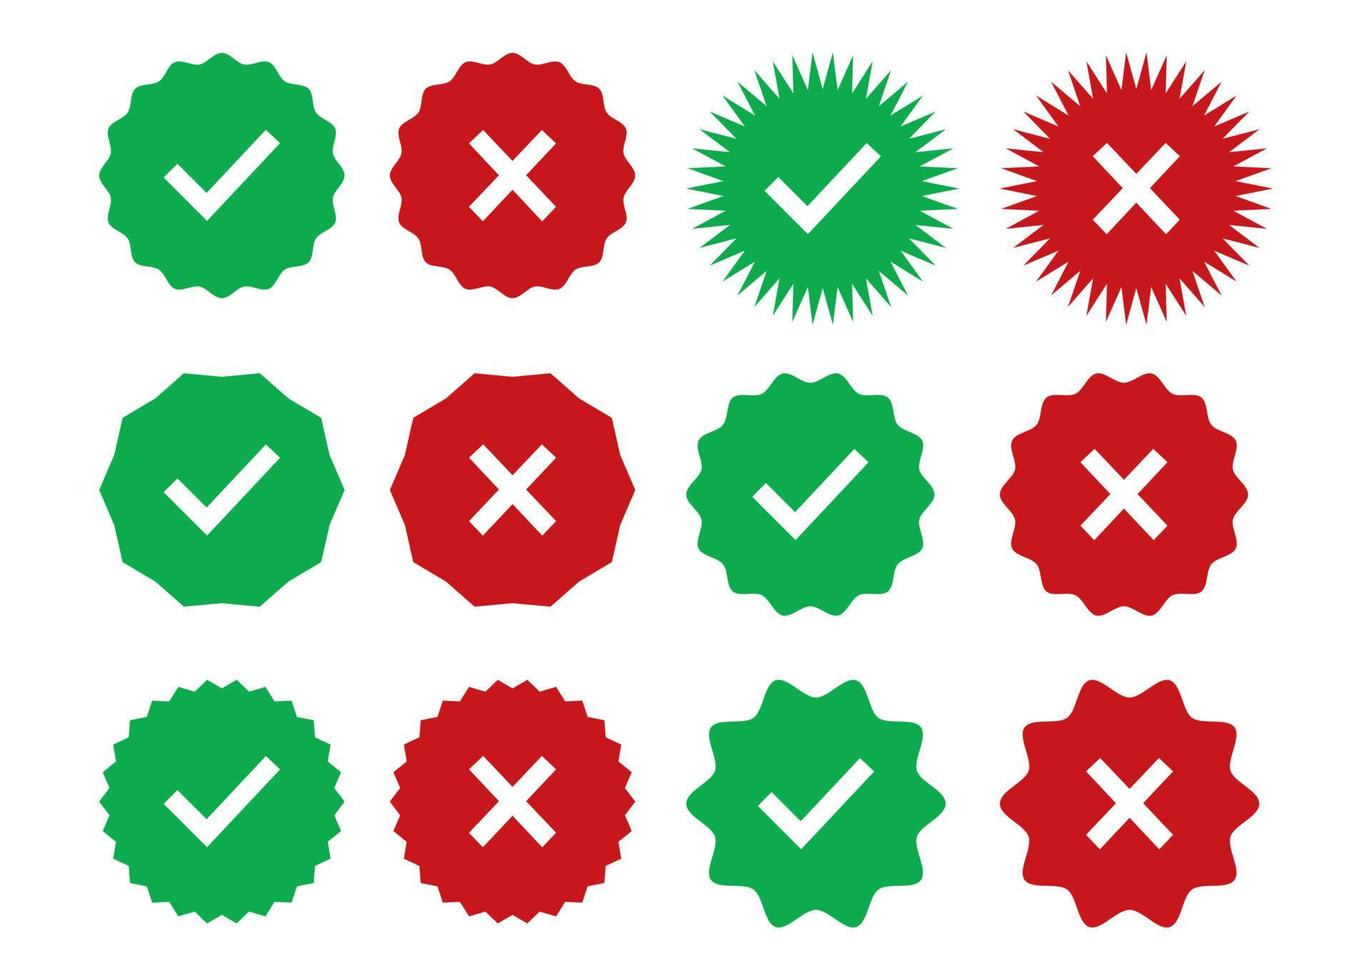 Checkmarks of Accepted Rejected, Approved Disapproved, Yes No, Right Wrong, Green Red, Correct False vector